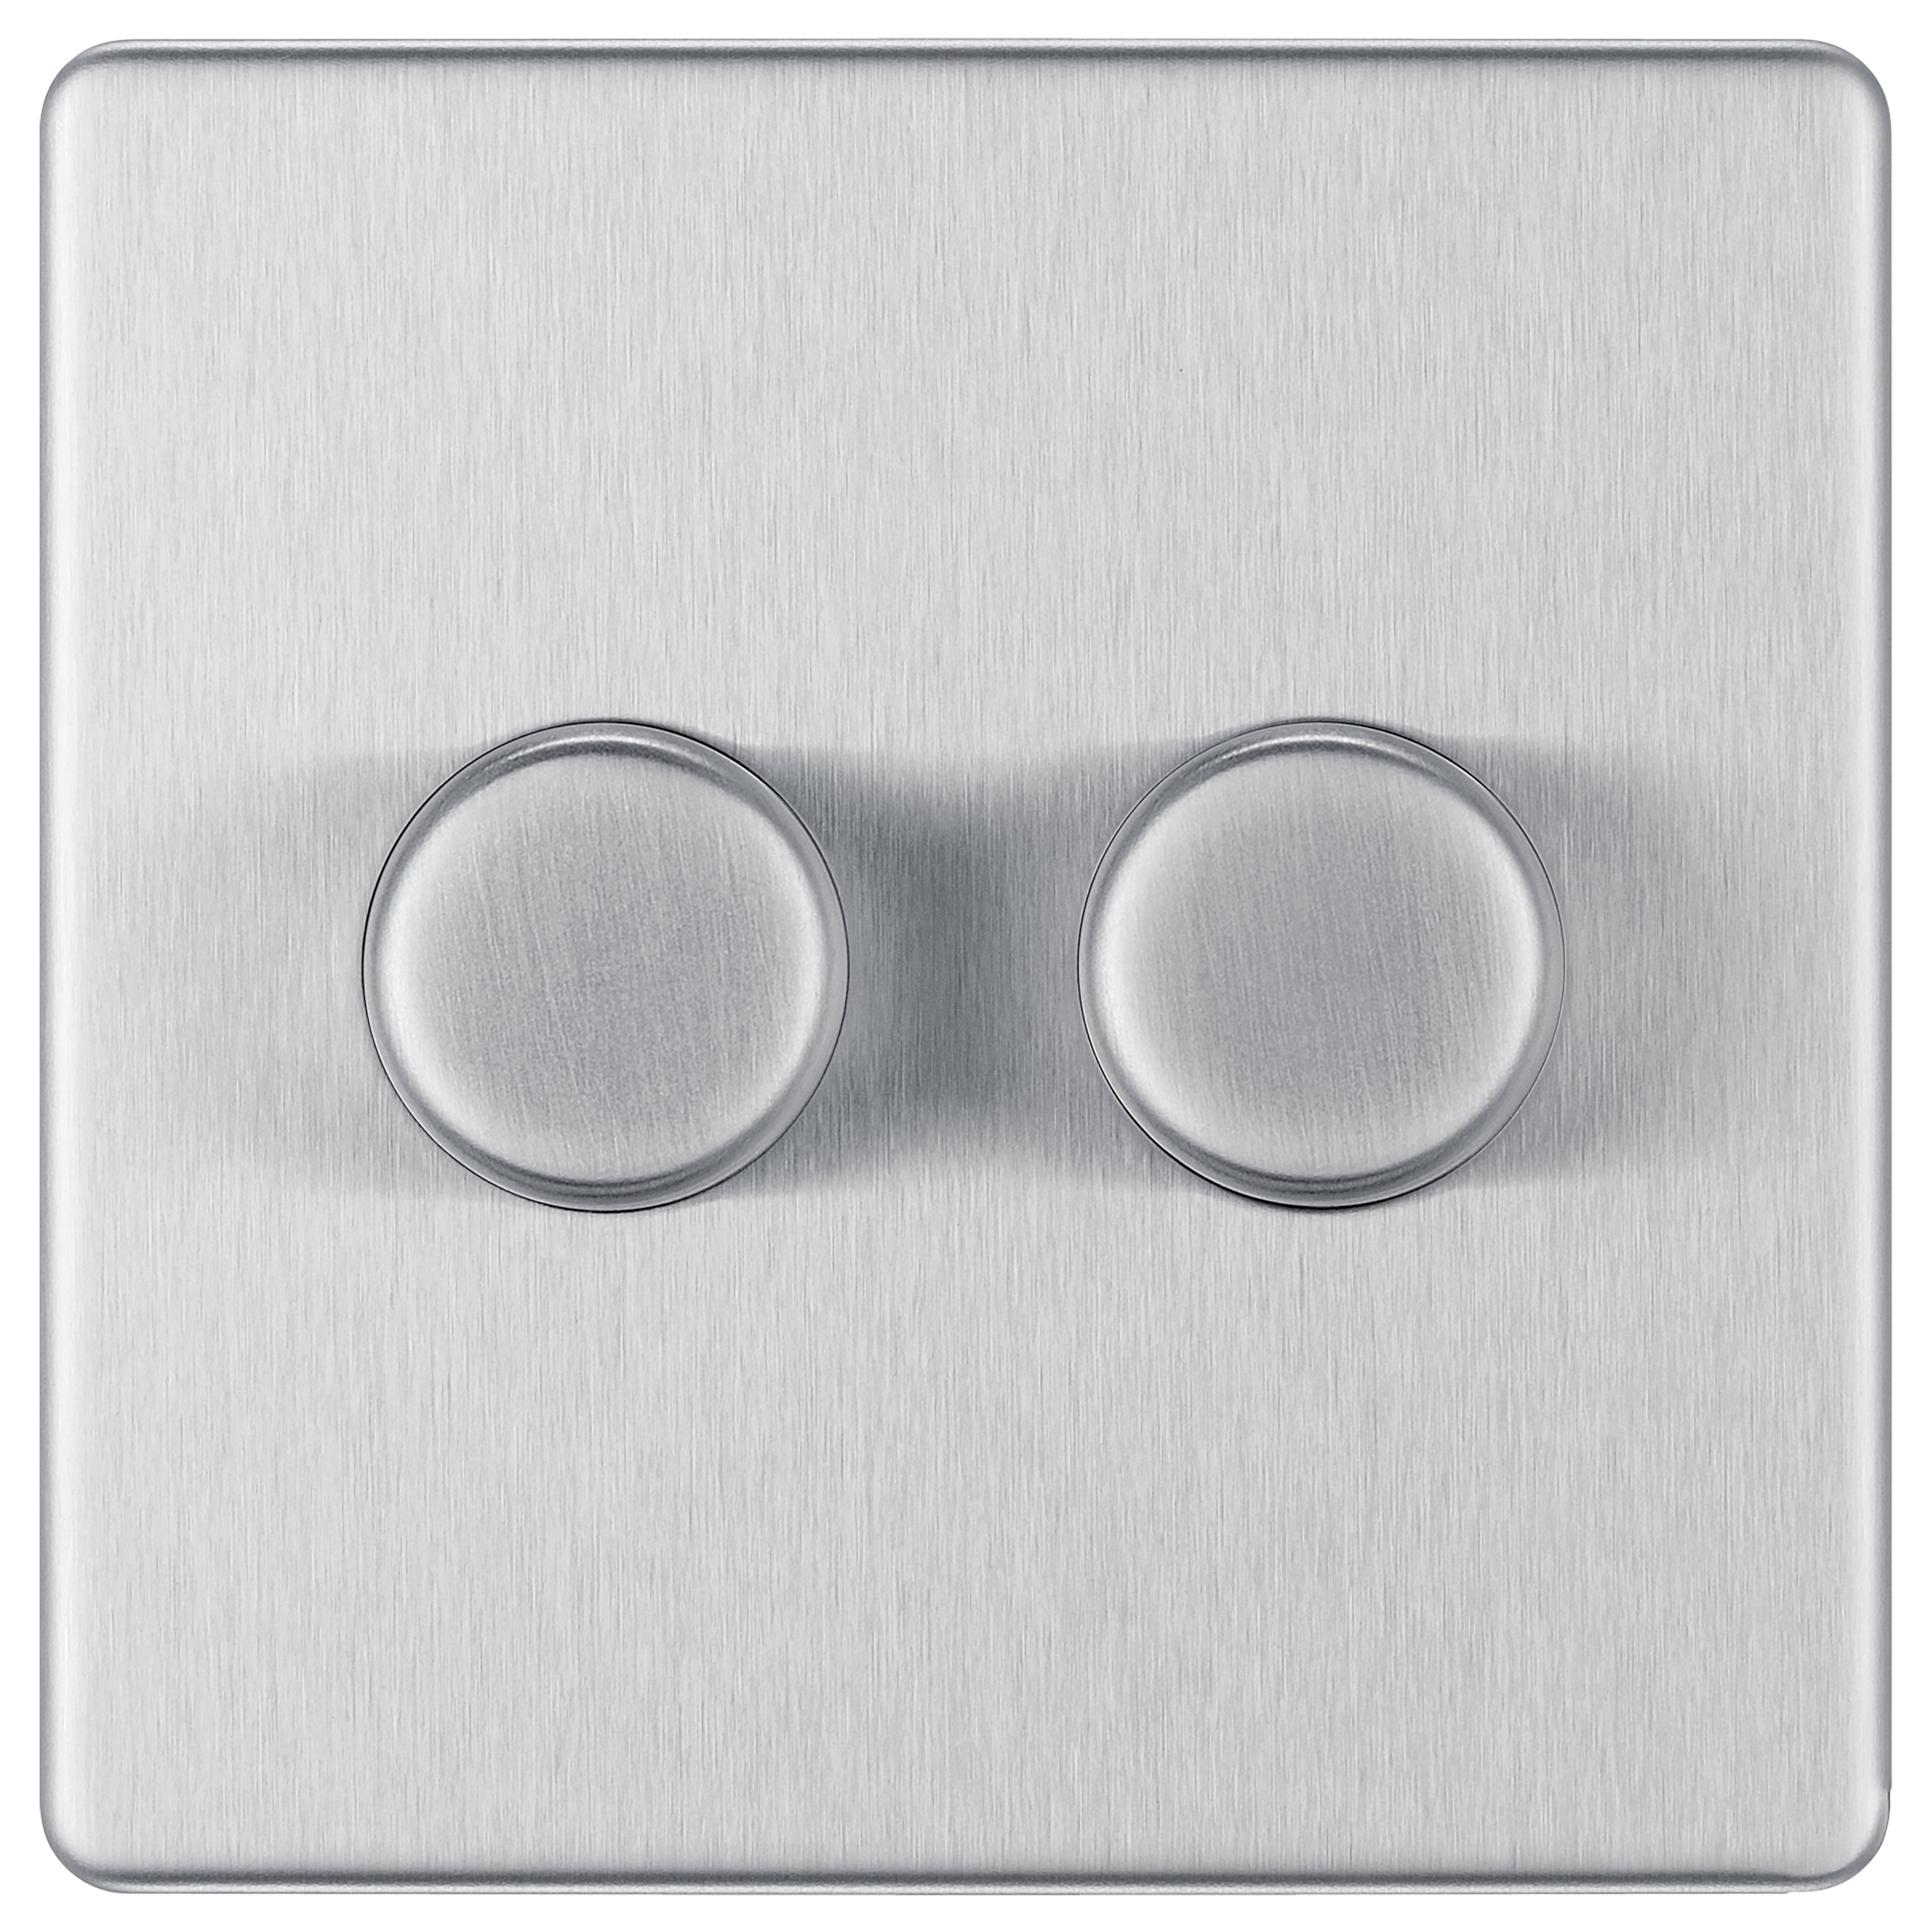 Image of BG Screwless Flatplate Brushed Steel 400W Double Dimmer Switch 2-Way Push On/Off